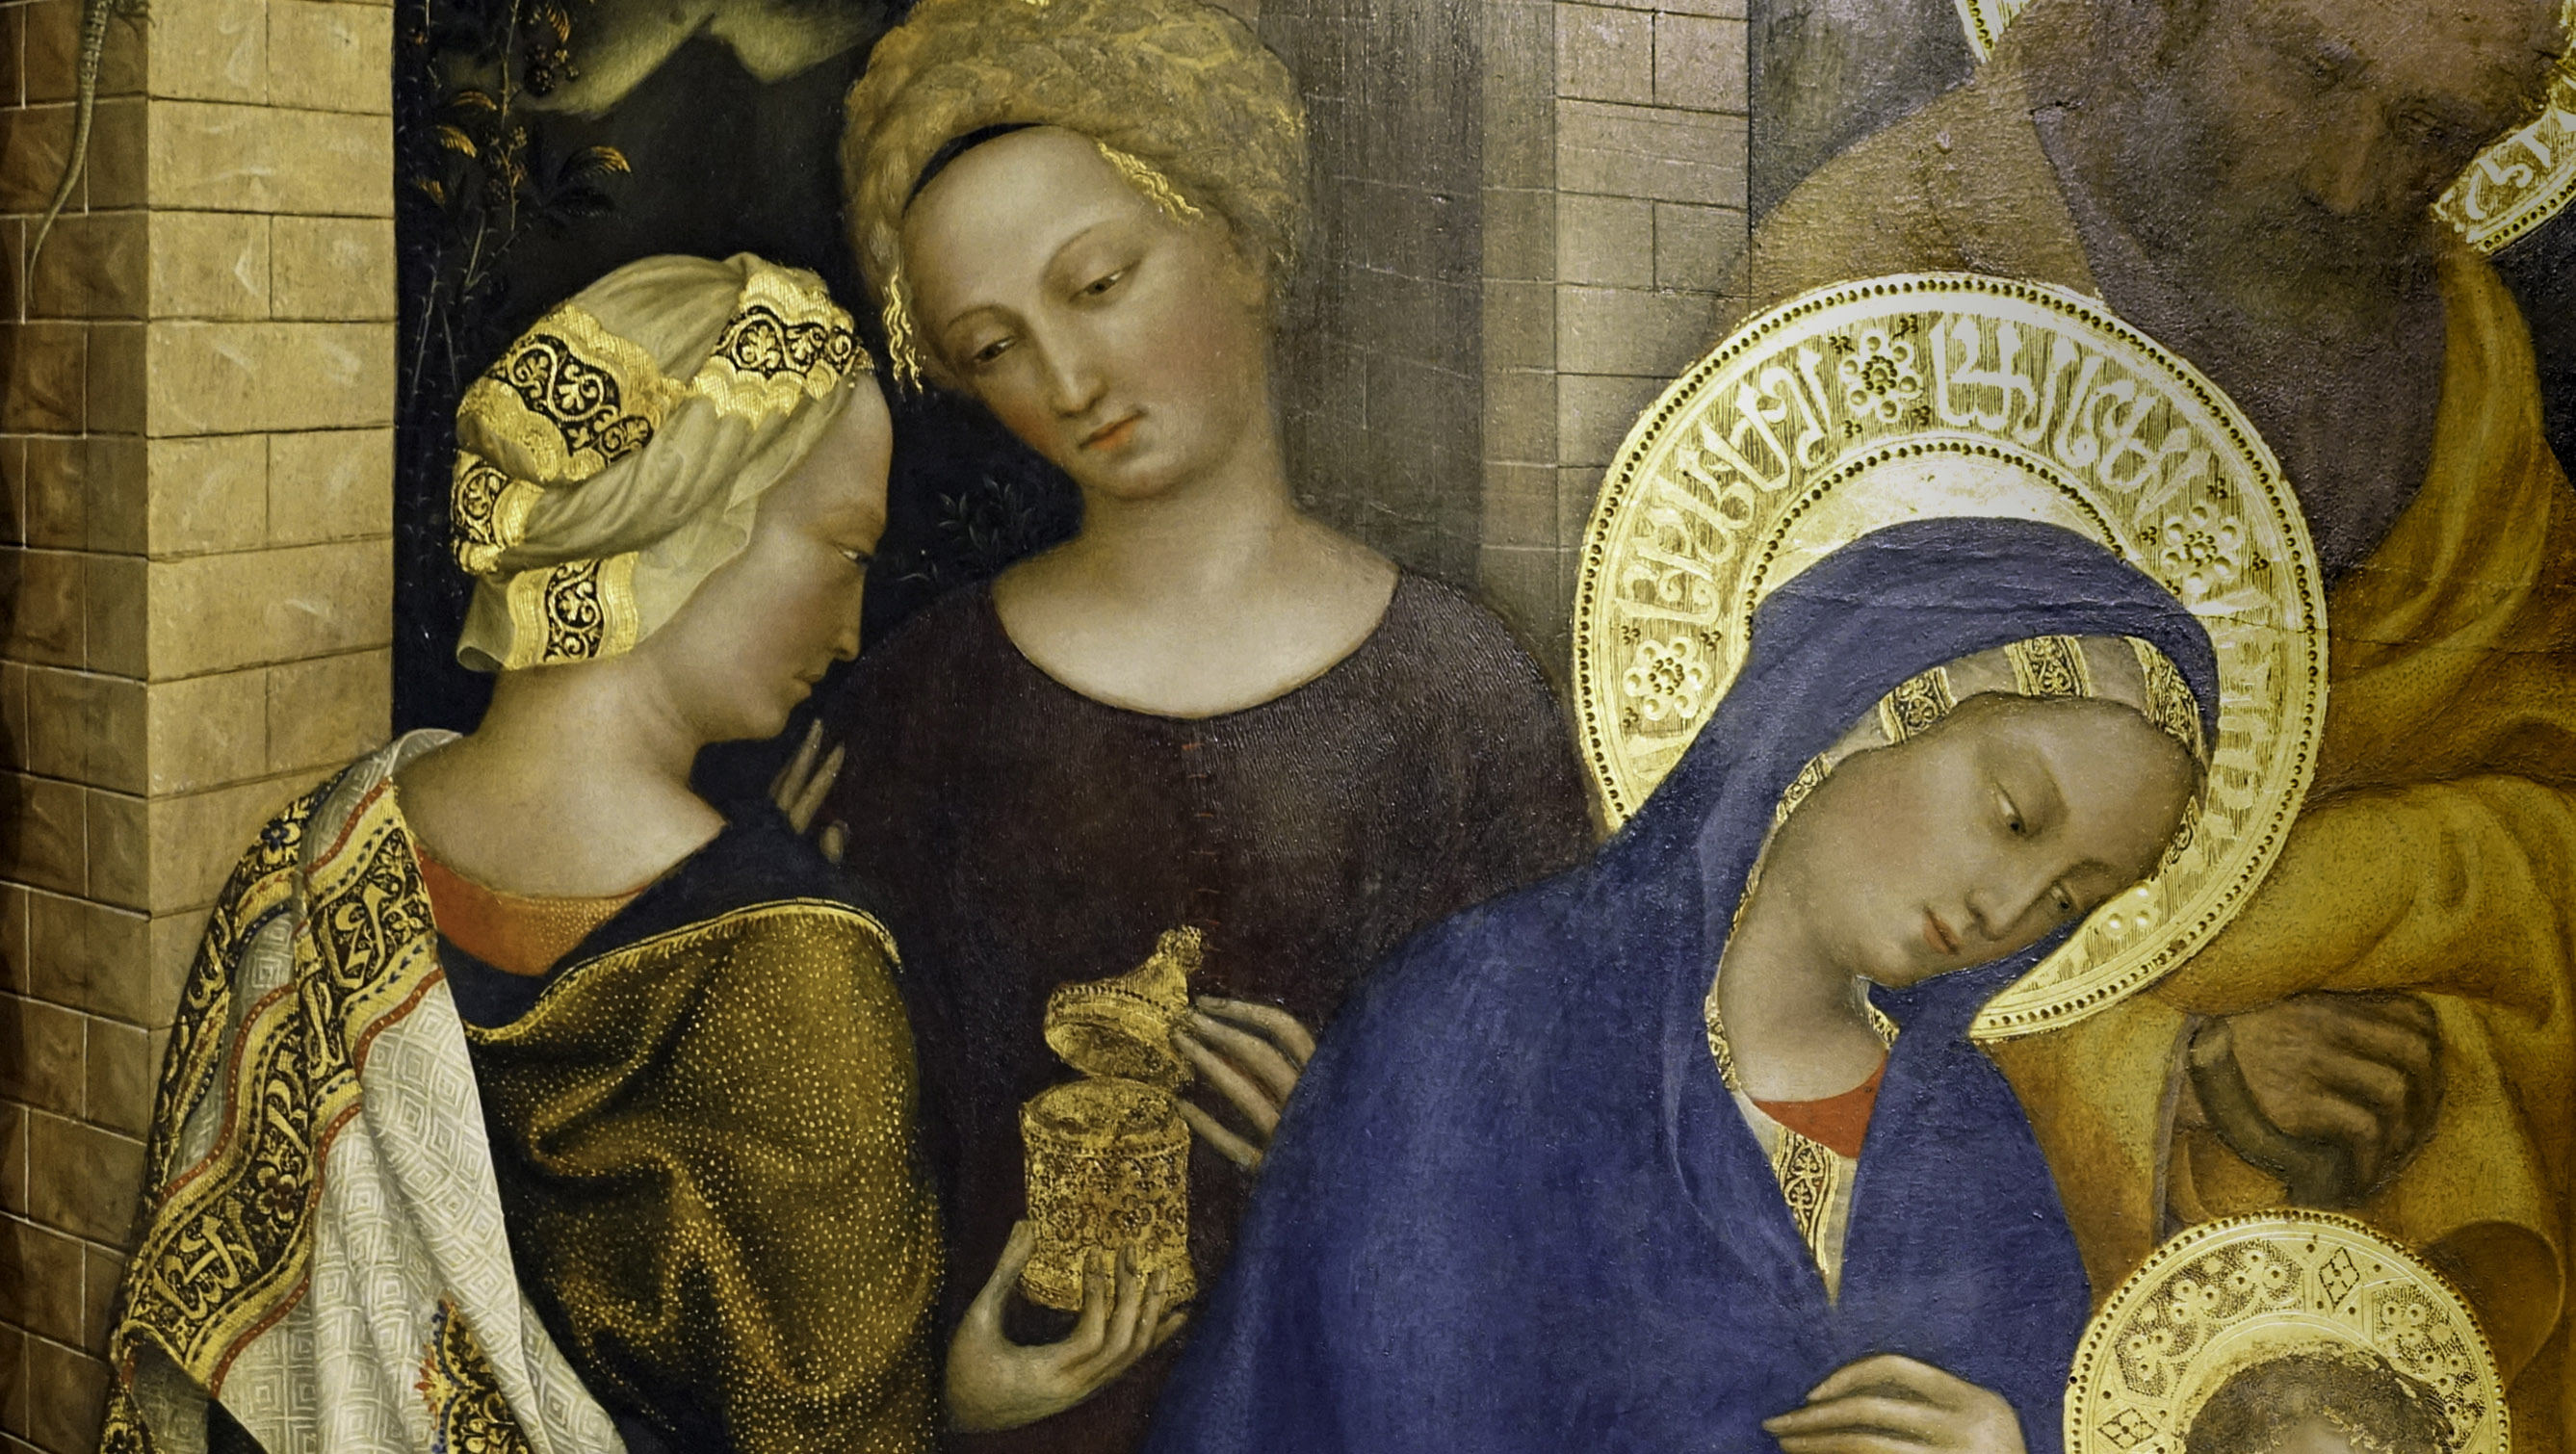 Gentile da Fabriano, Adoration of the Magi (detail with the Virgin Mary in blue, Joseph in yellow behind her, Jesus on her lap being kissed by the king Melchior, with kings Casper stooping, and Balthazar standing), 1423, tempera on panel, 283 x 300 cm (Uffizi Gallery, Florence), photo: Steven Zucker, CC BY-NC-SA 4.0